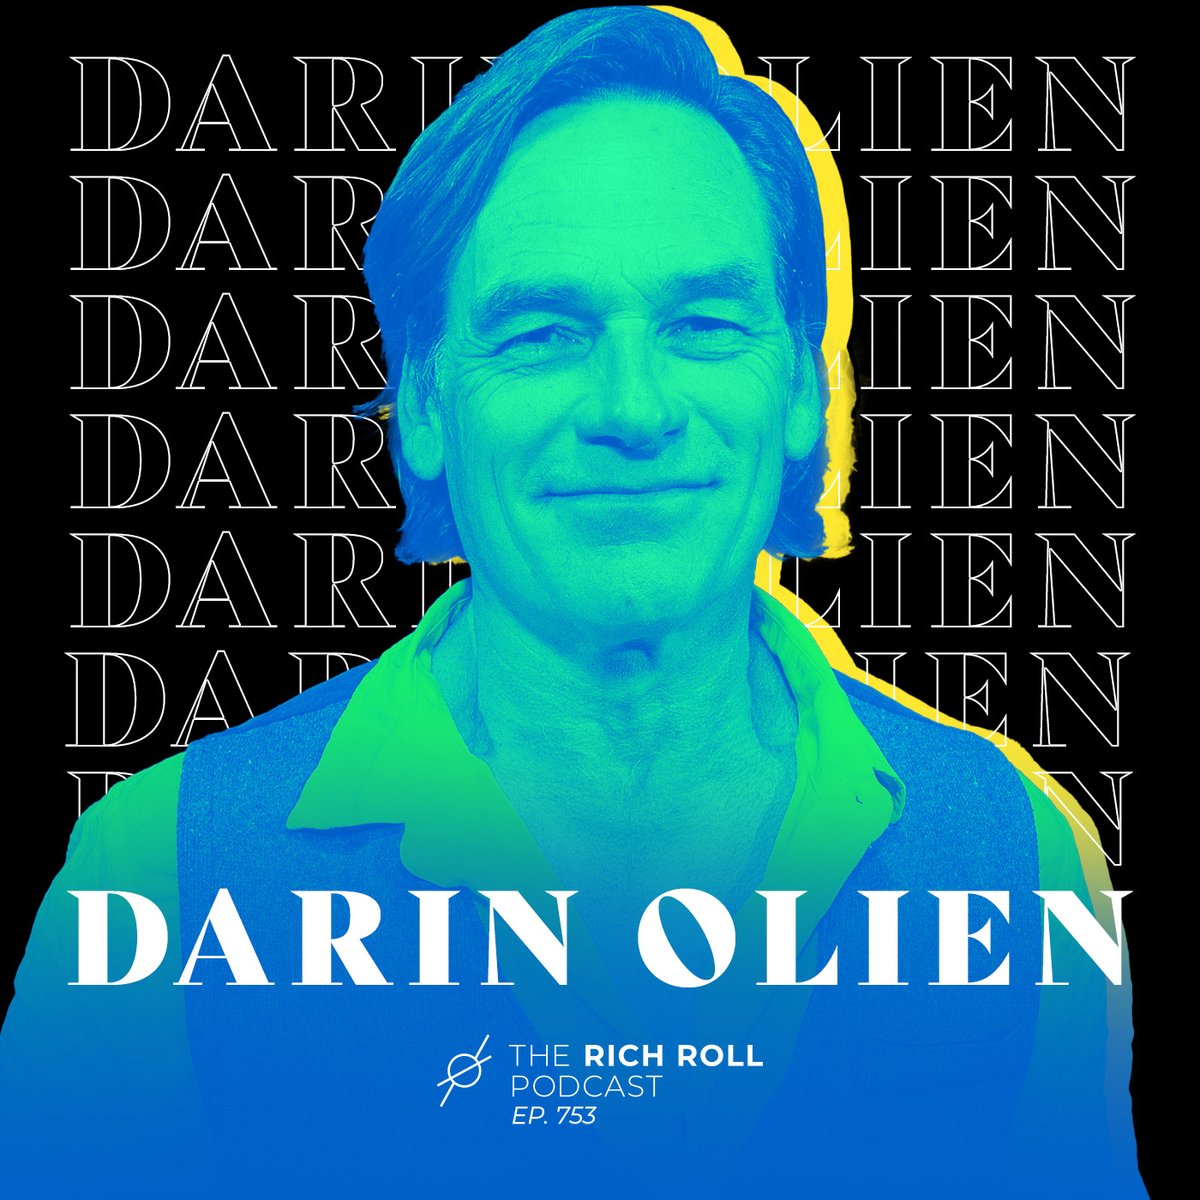 #MondayMotivation✨@RichRolll talks with wellness expert @DarinOlien about his new book Fatal Conveniences and how to reduce your exposure to the toxic products we use every day. 👉🏽bit.ly/richroll753 #RichRoll #RichRollPodcast #DarinOlien #FatalConveniences #toxic #chemicals